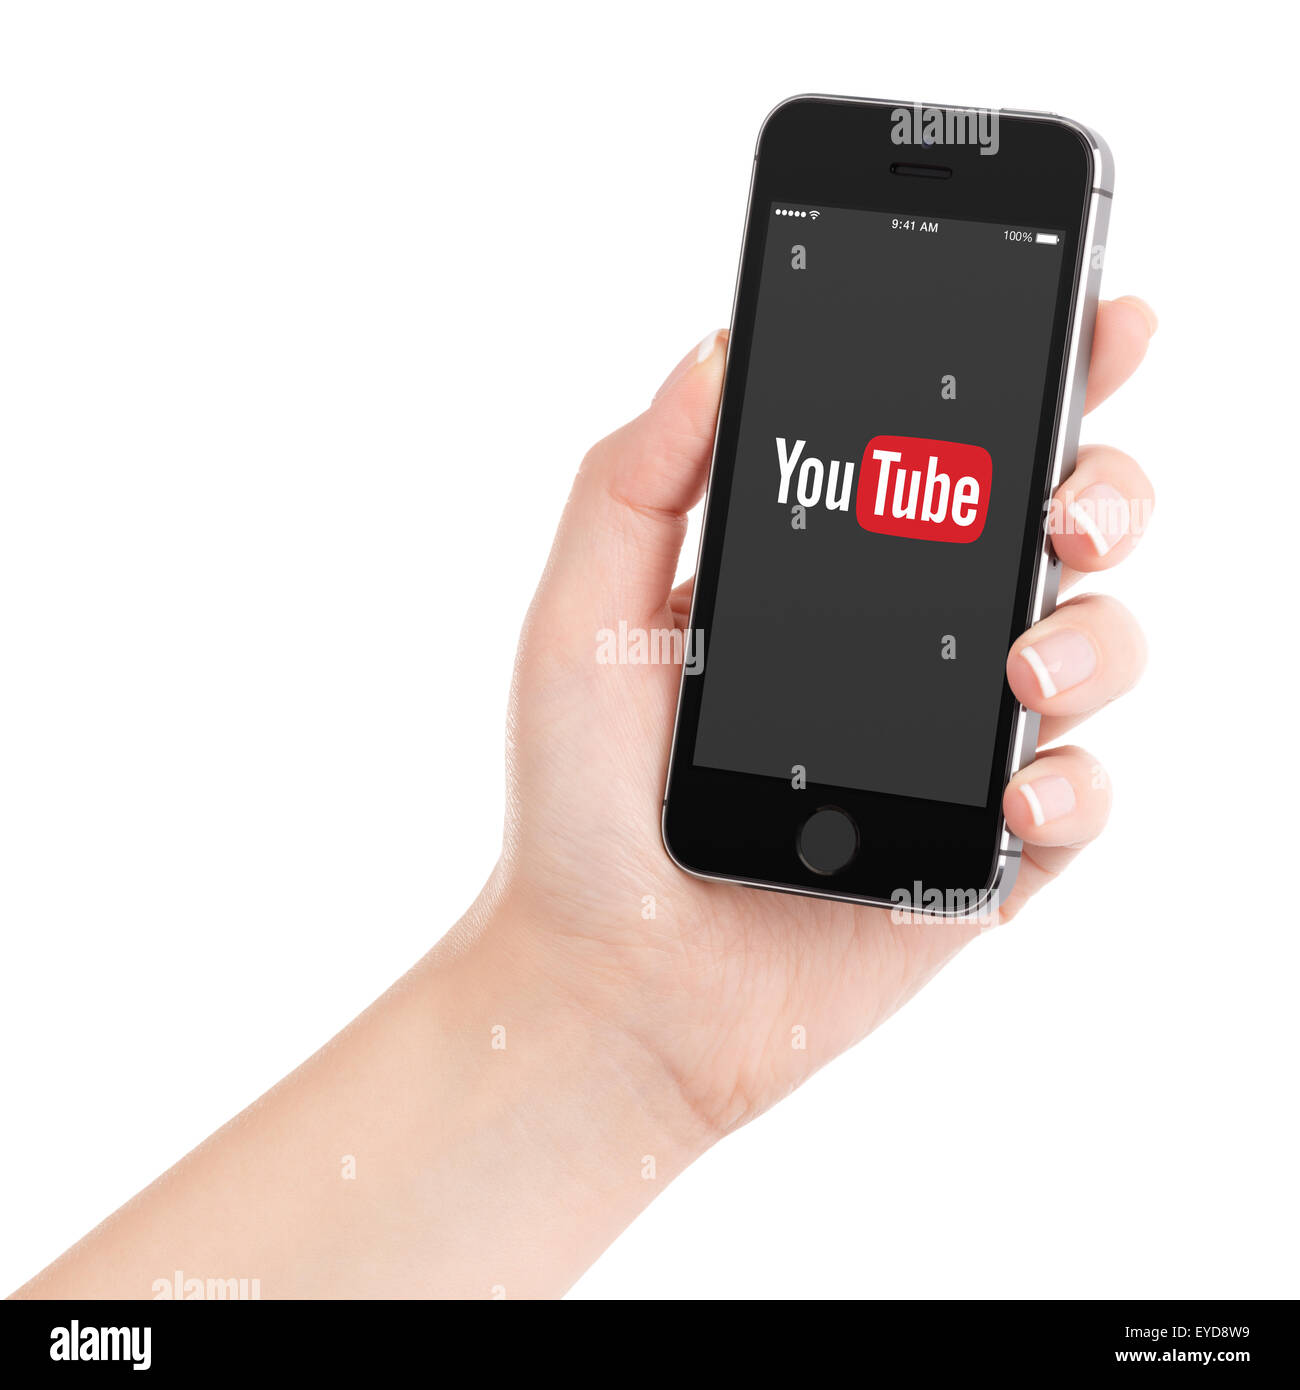 Varna, Bulgaria - February 02, 2015: Female hand holding Apple iPhone 5S with YouTube app on the display. Stock Photo